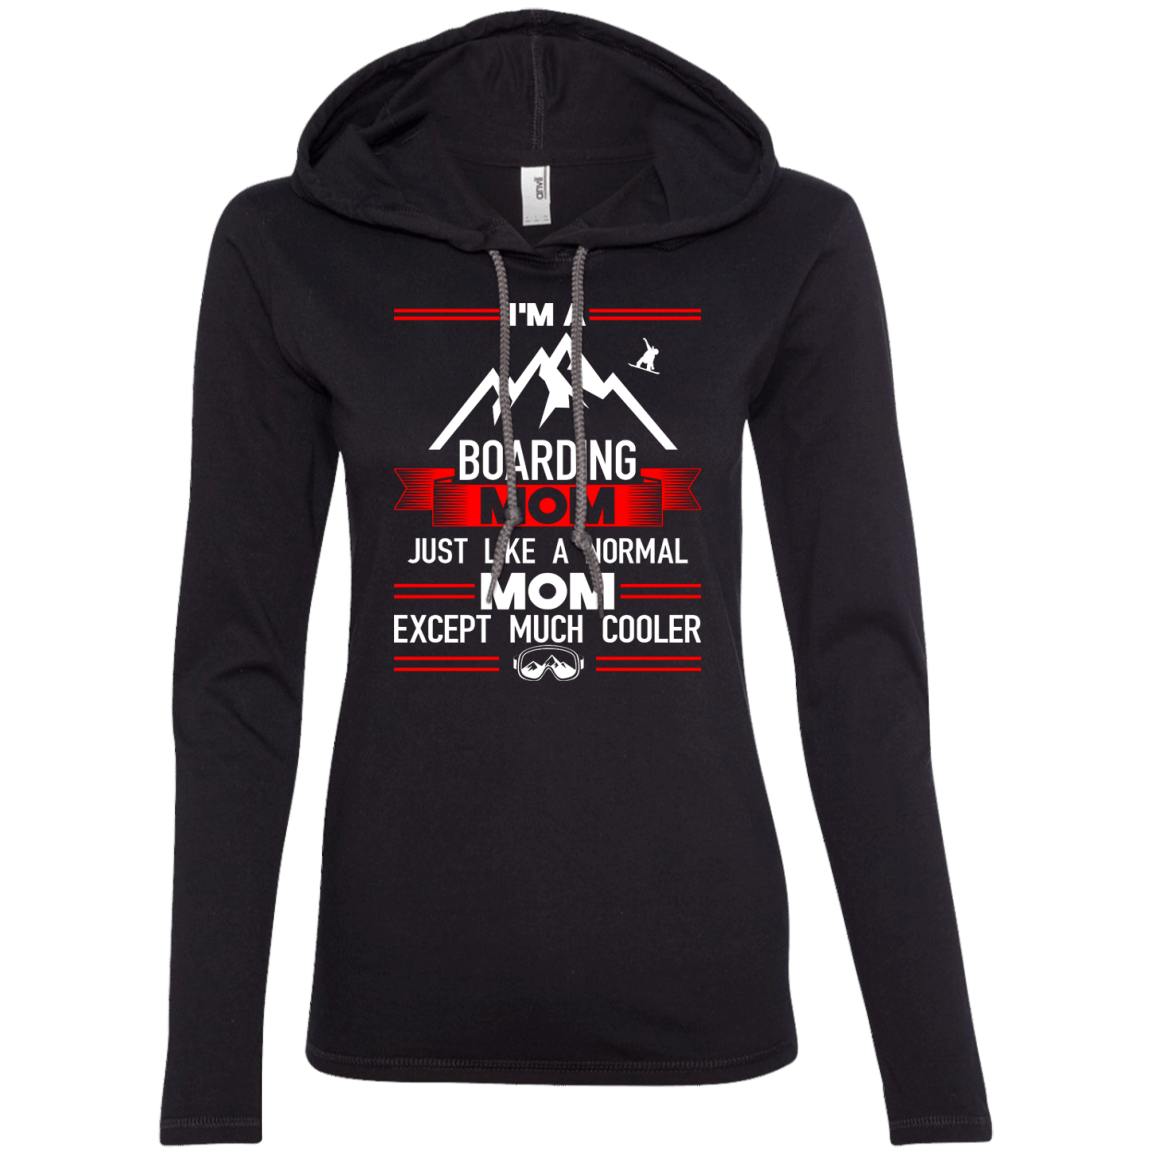 I'm A Boarding Mom Just Like A Normal Mom Except Much Cooler Hoodies - Powderaddicts